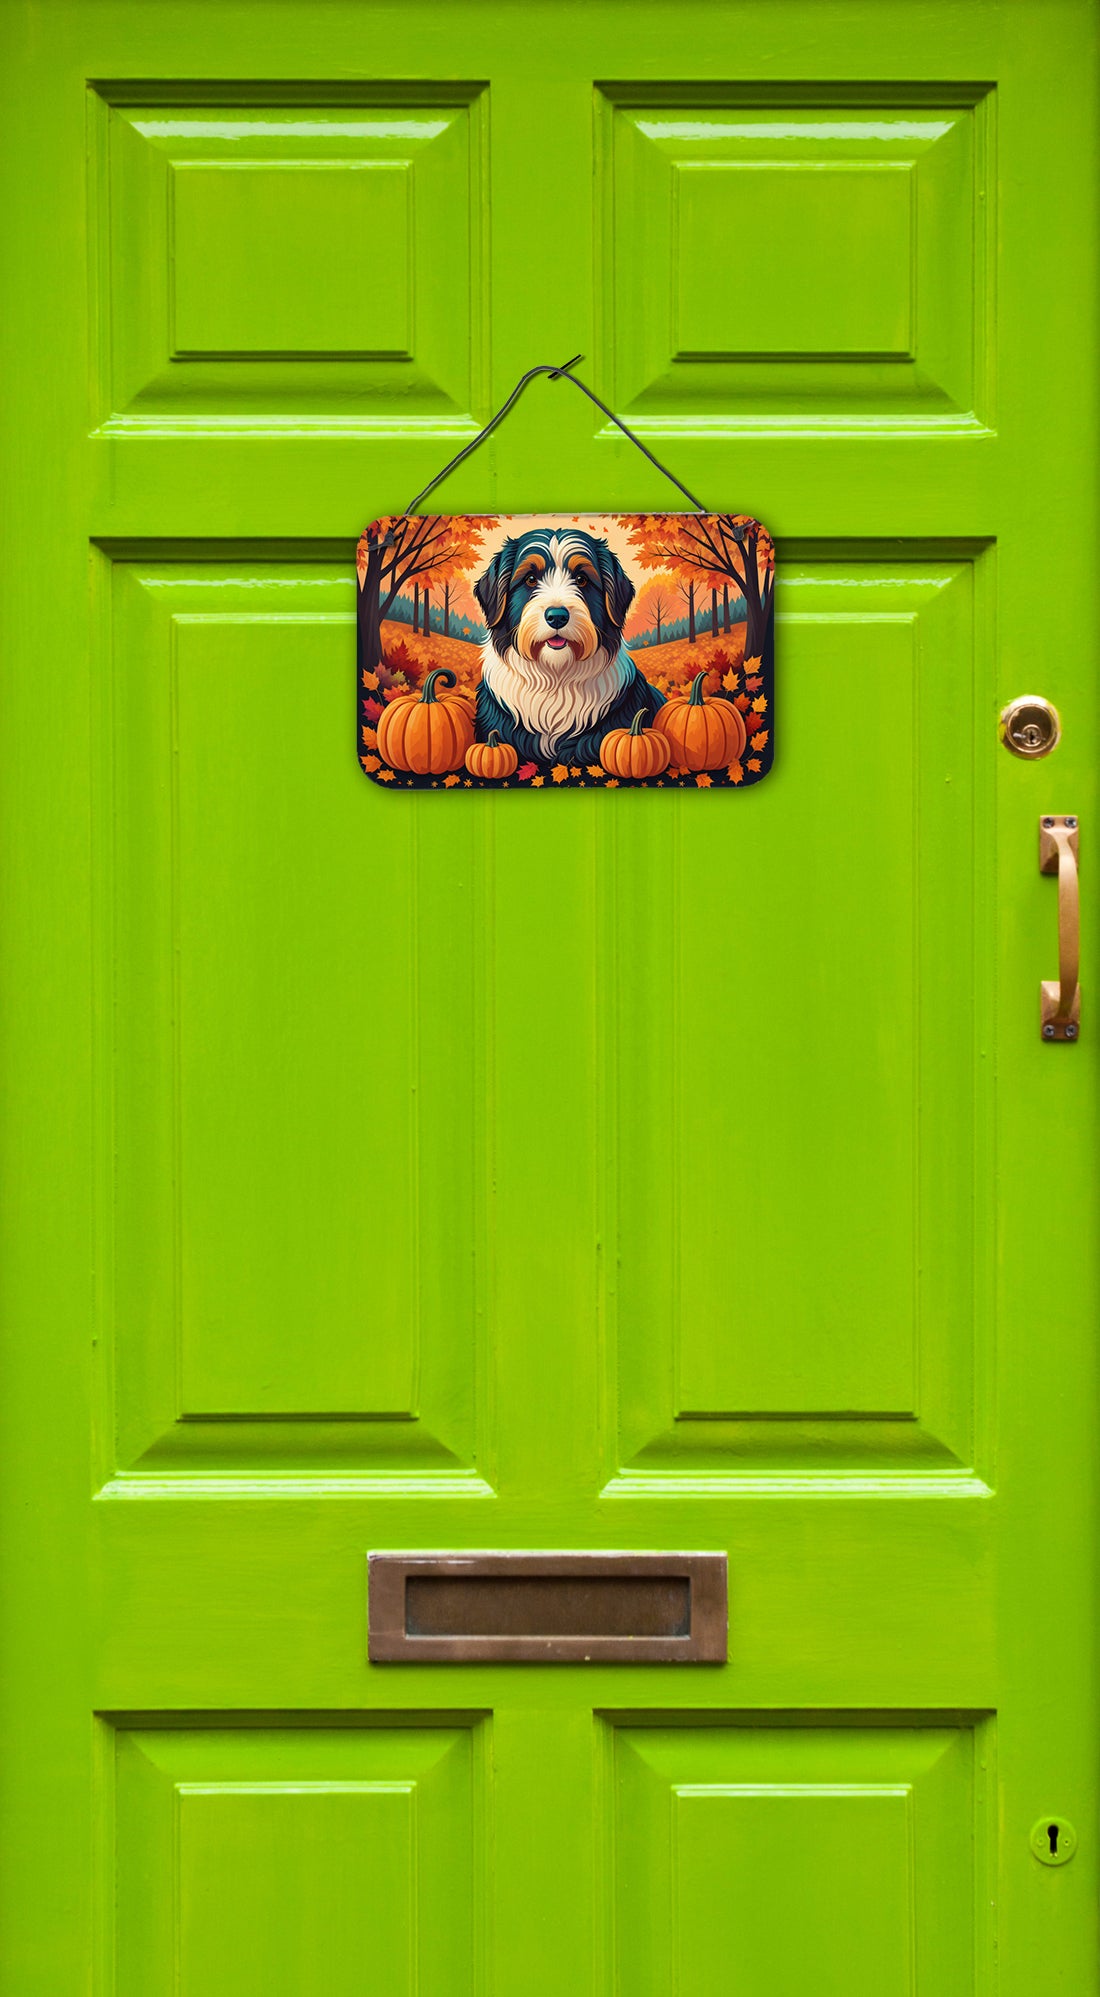 Buy this Bearded Collie Fall Wall or Door Hanging Prints